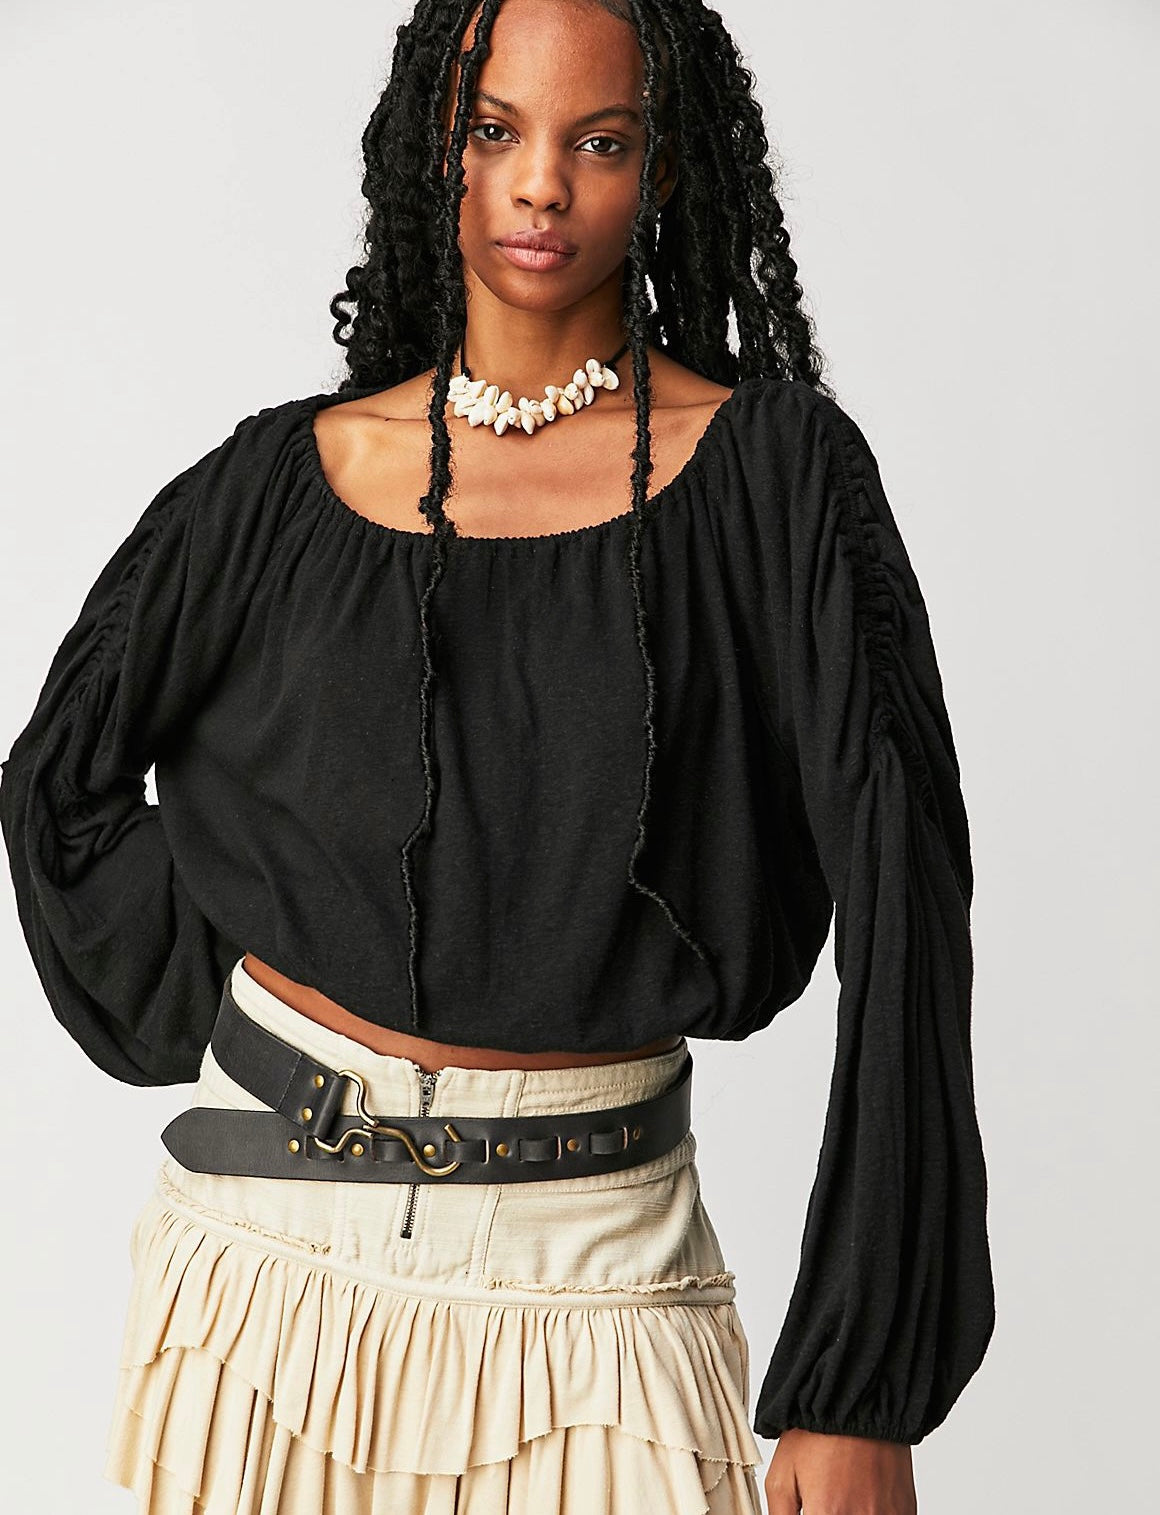 Free People In a Dream Top